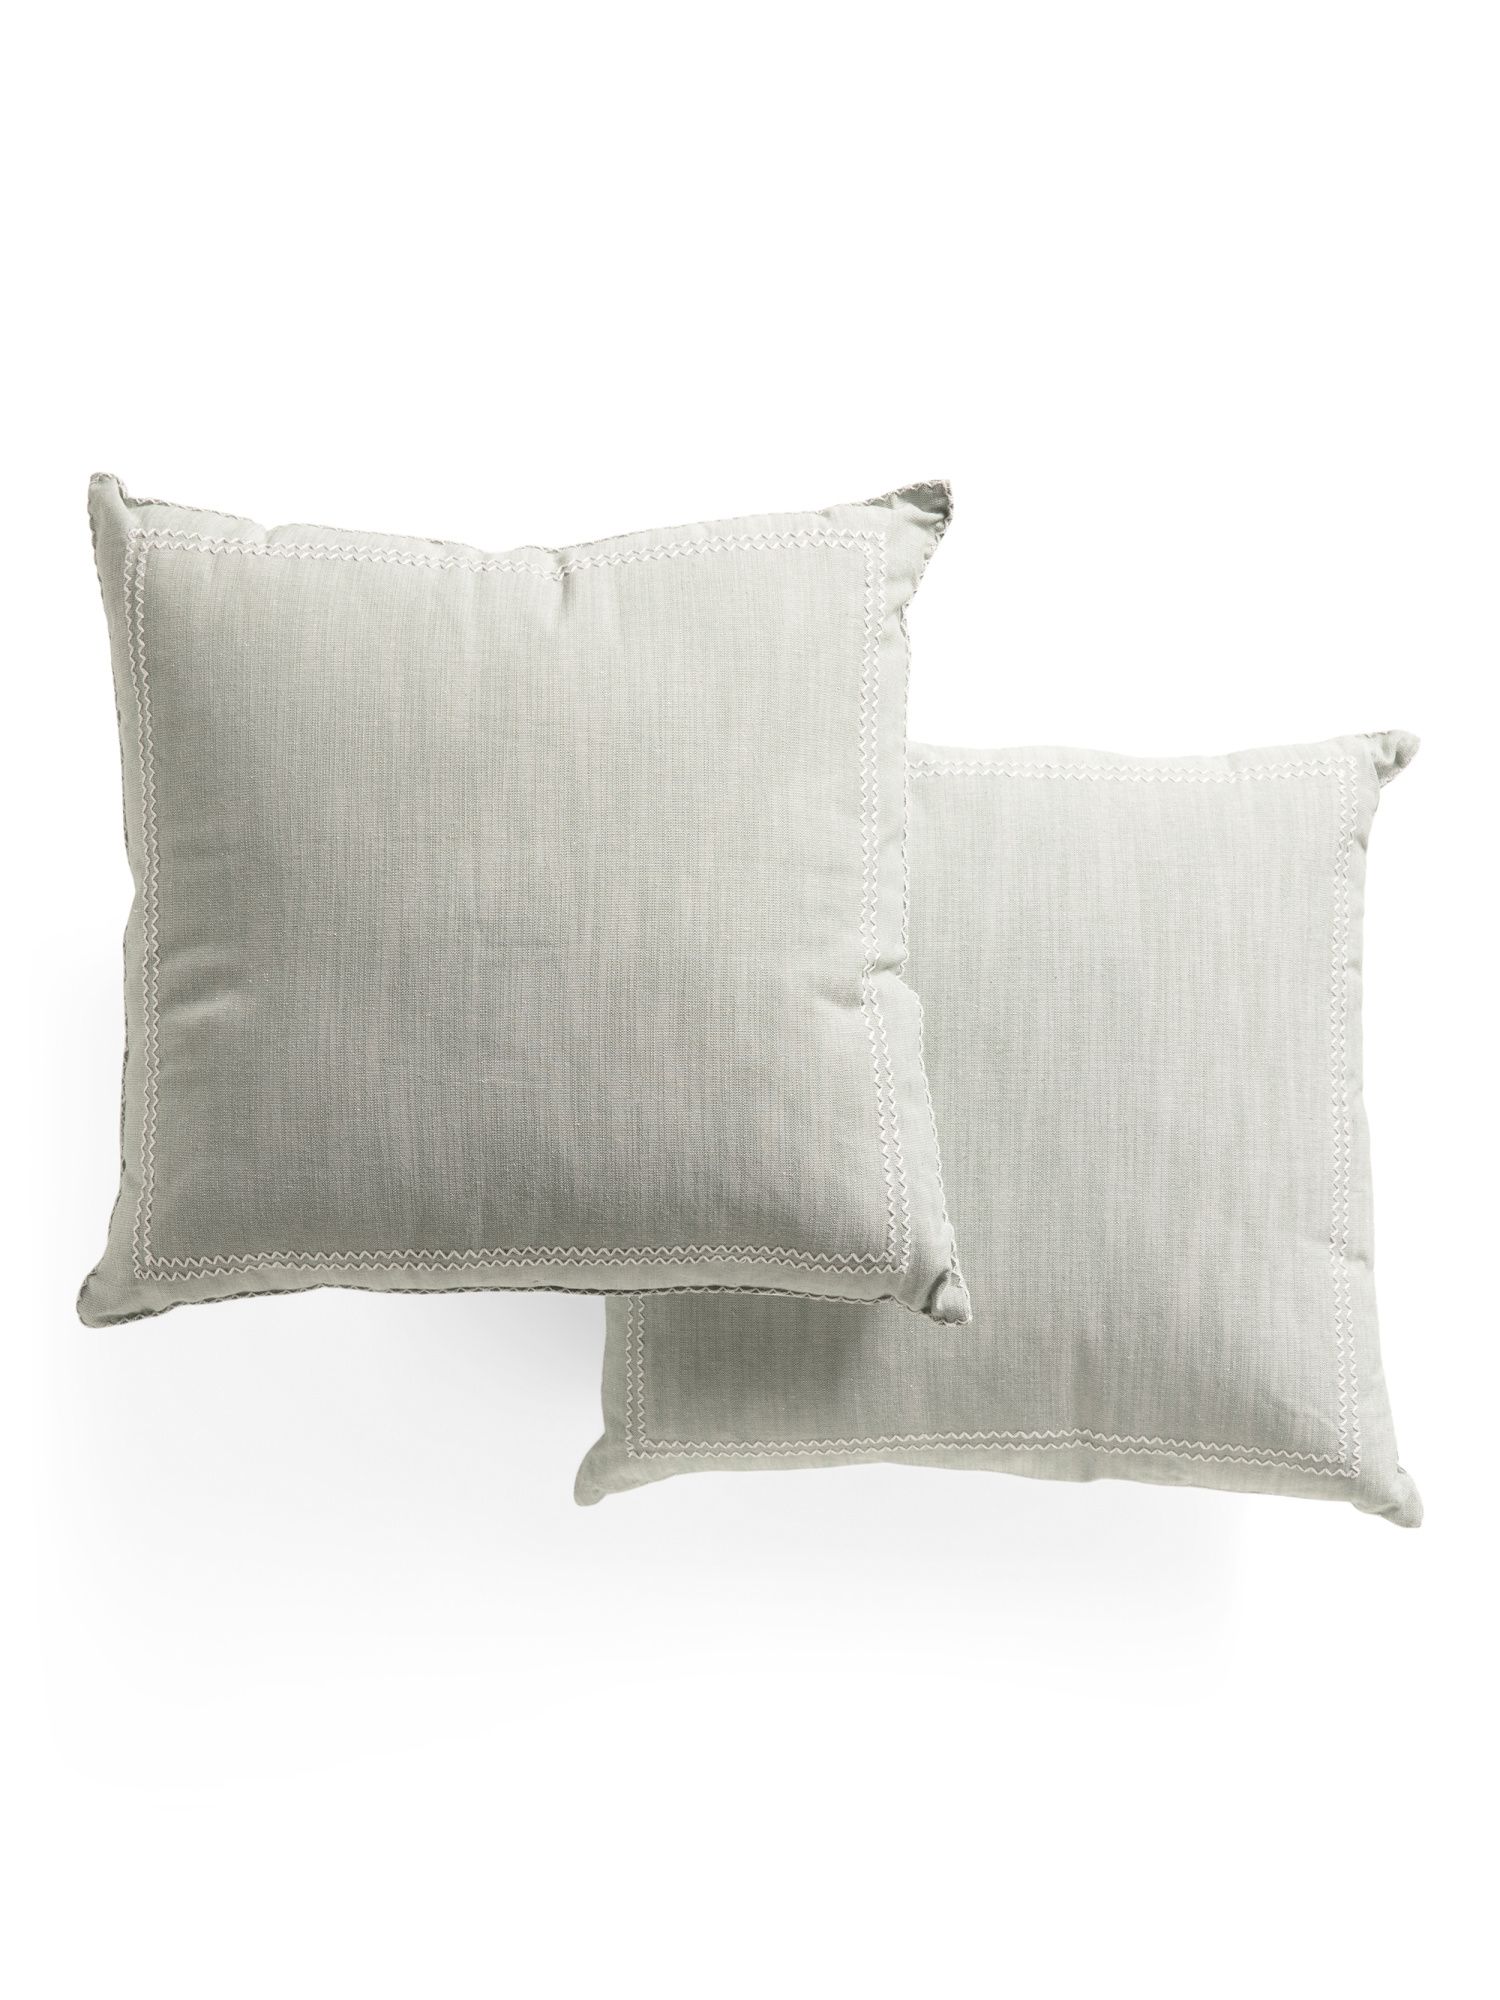 20x20 Set Of 2 Chambray Pillows With Embroidered Border | TJ Maxx